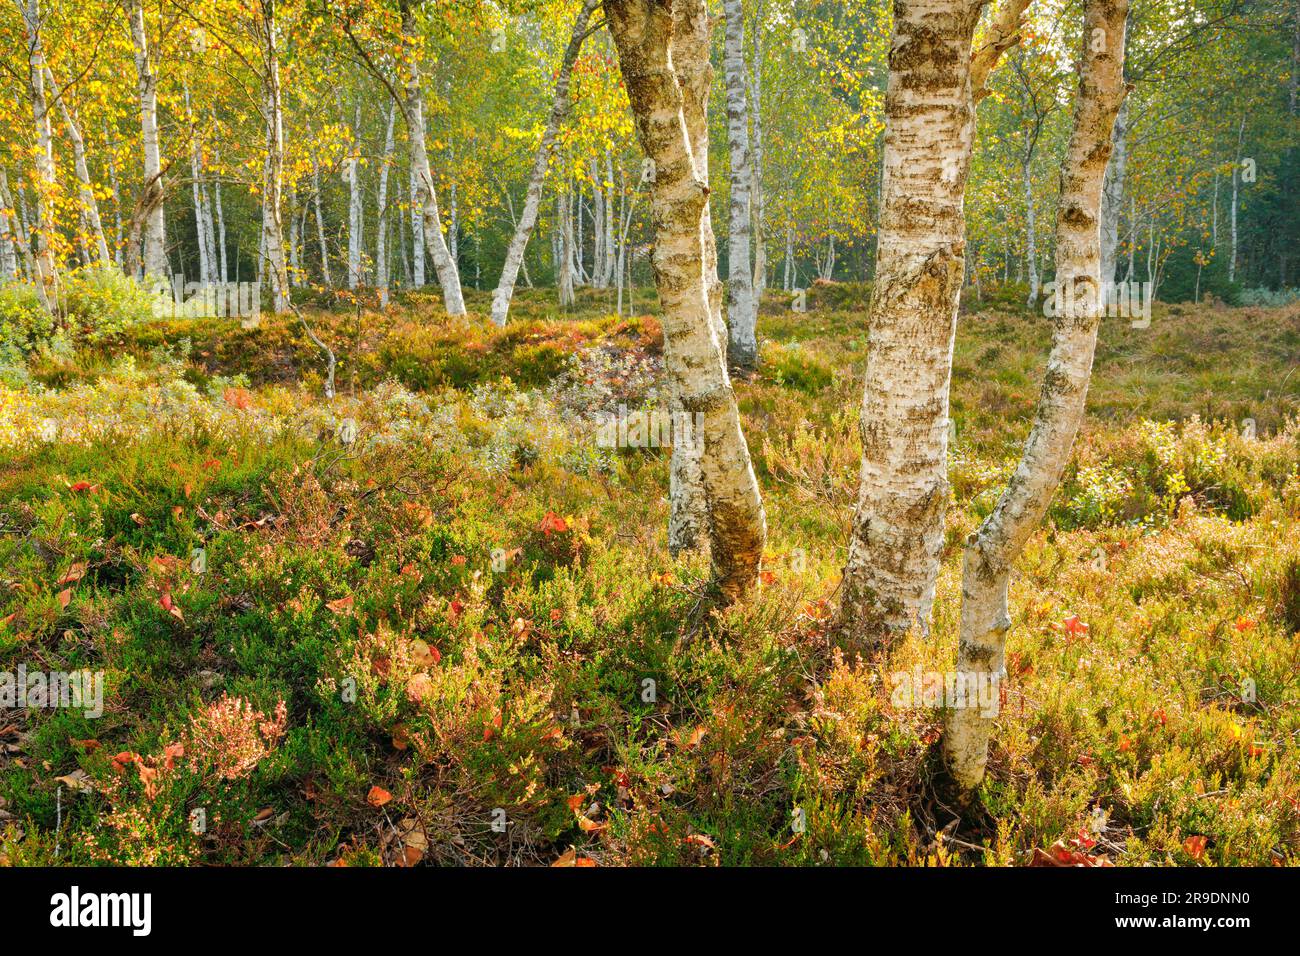 Birch forest with heather and blueberry bushes in early autumn. Near Les Ponts-de-Martel in the canton of Neuchatel, Switzerland Stock Photo